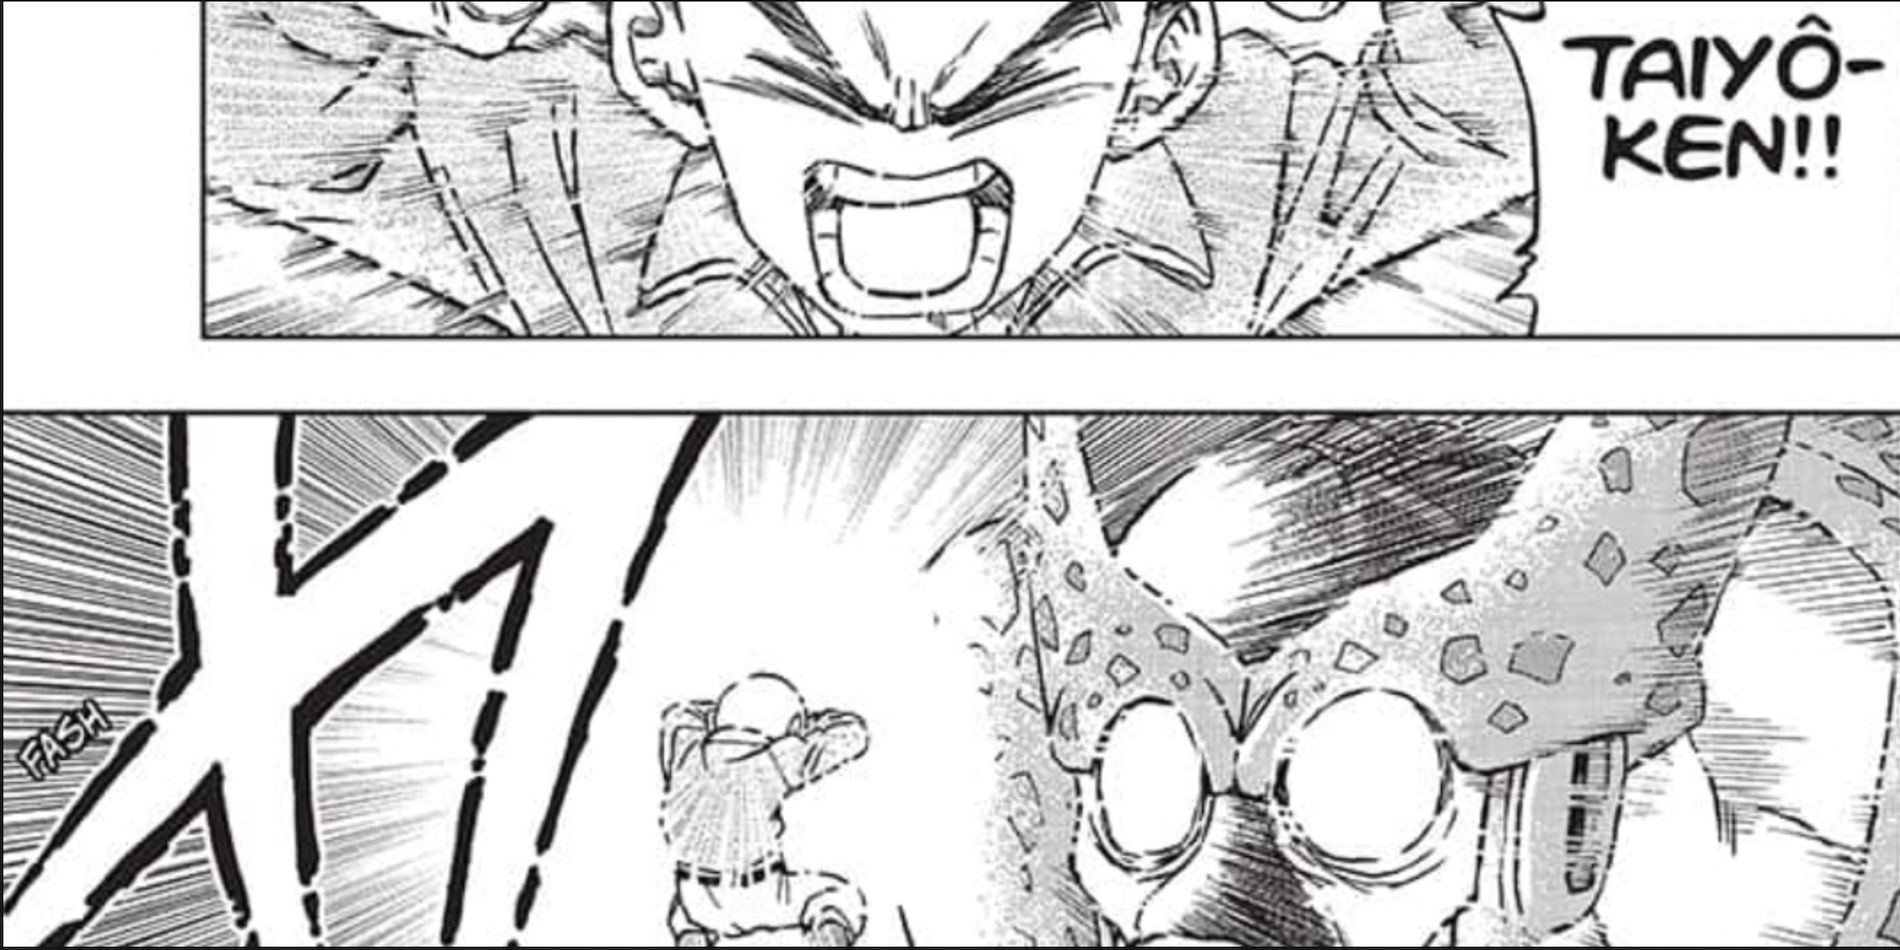 Krillin uses Solar Flare on Cell Max in Chapter 98 of Dragon Ball Super manga